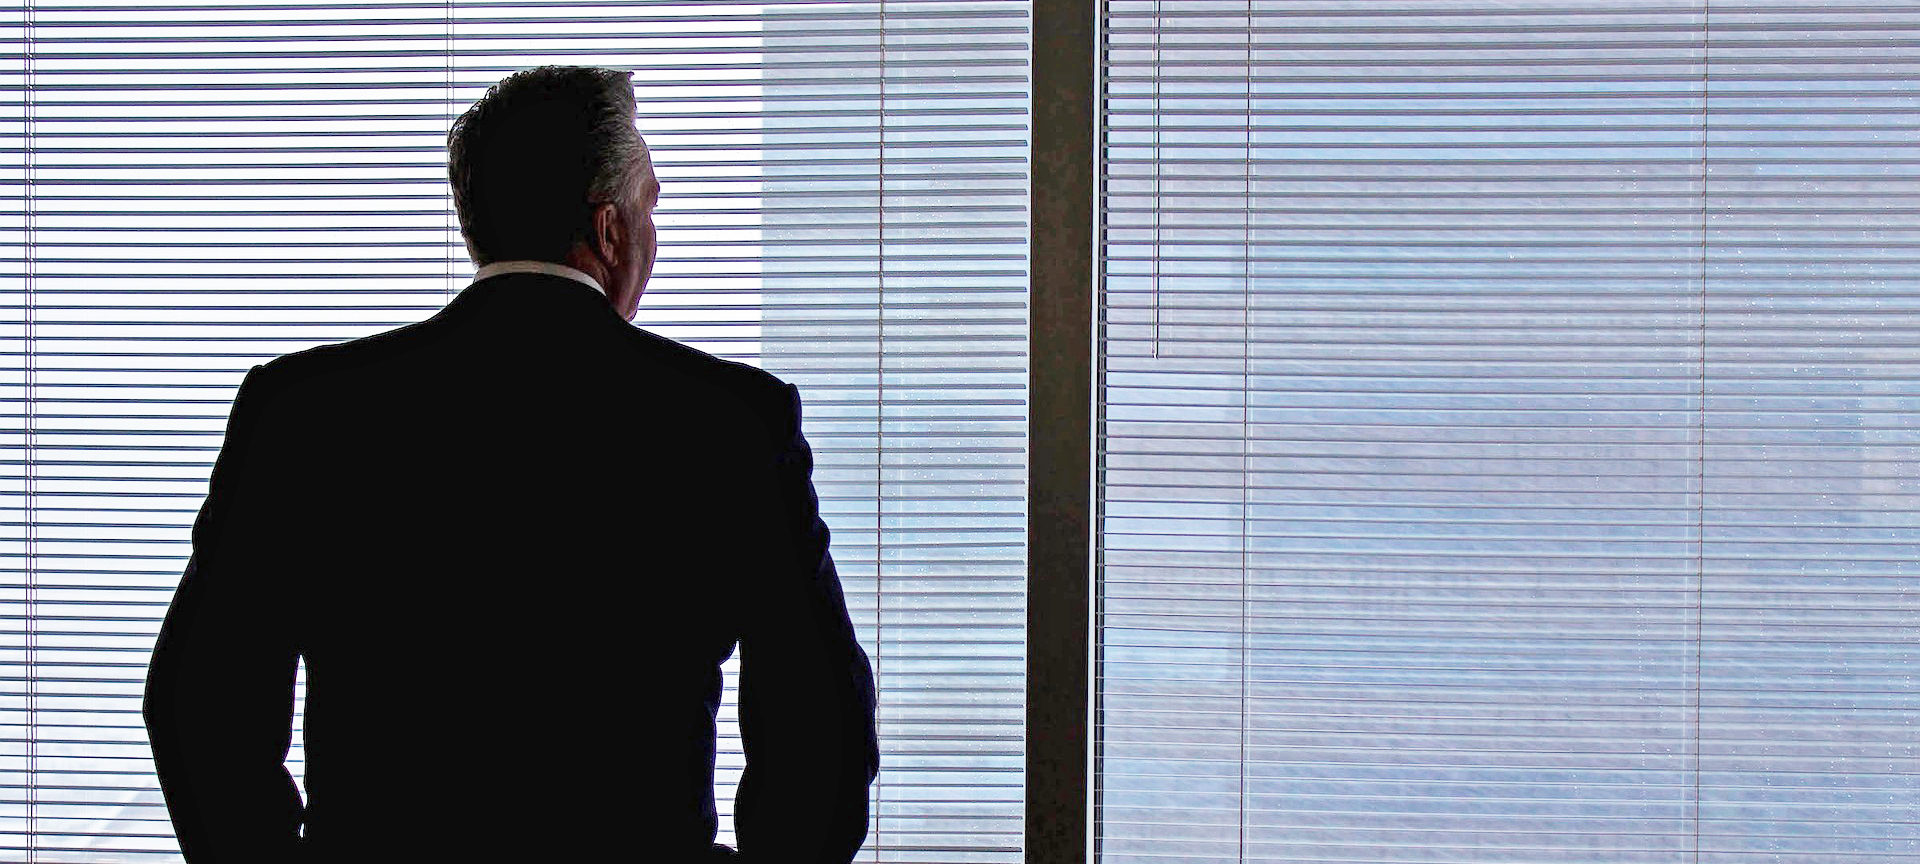 A man in a business suit stands in front of a window with closed blinds, facing away from the camera, contemplating succession planning.